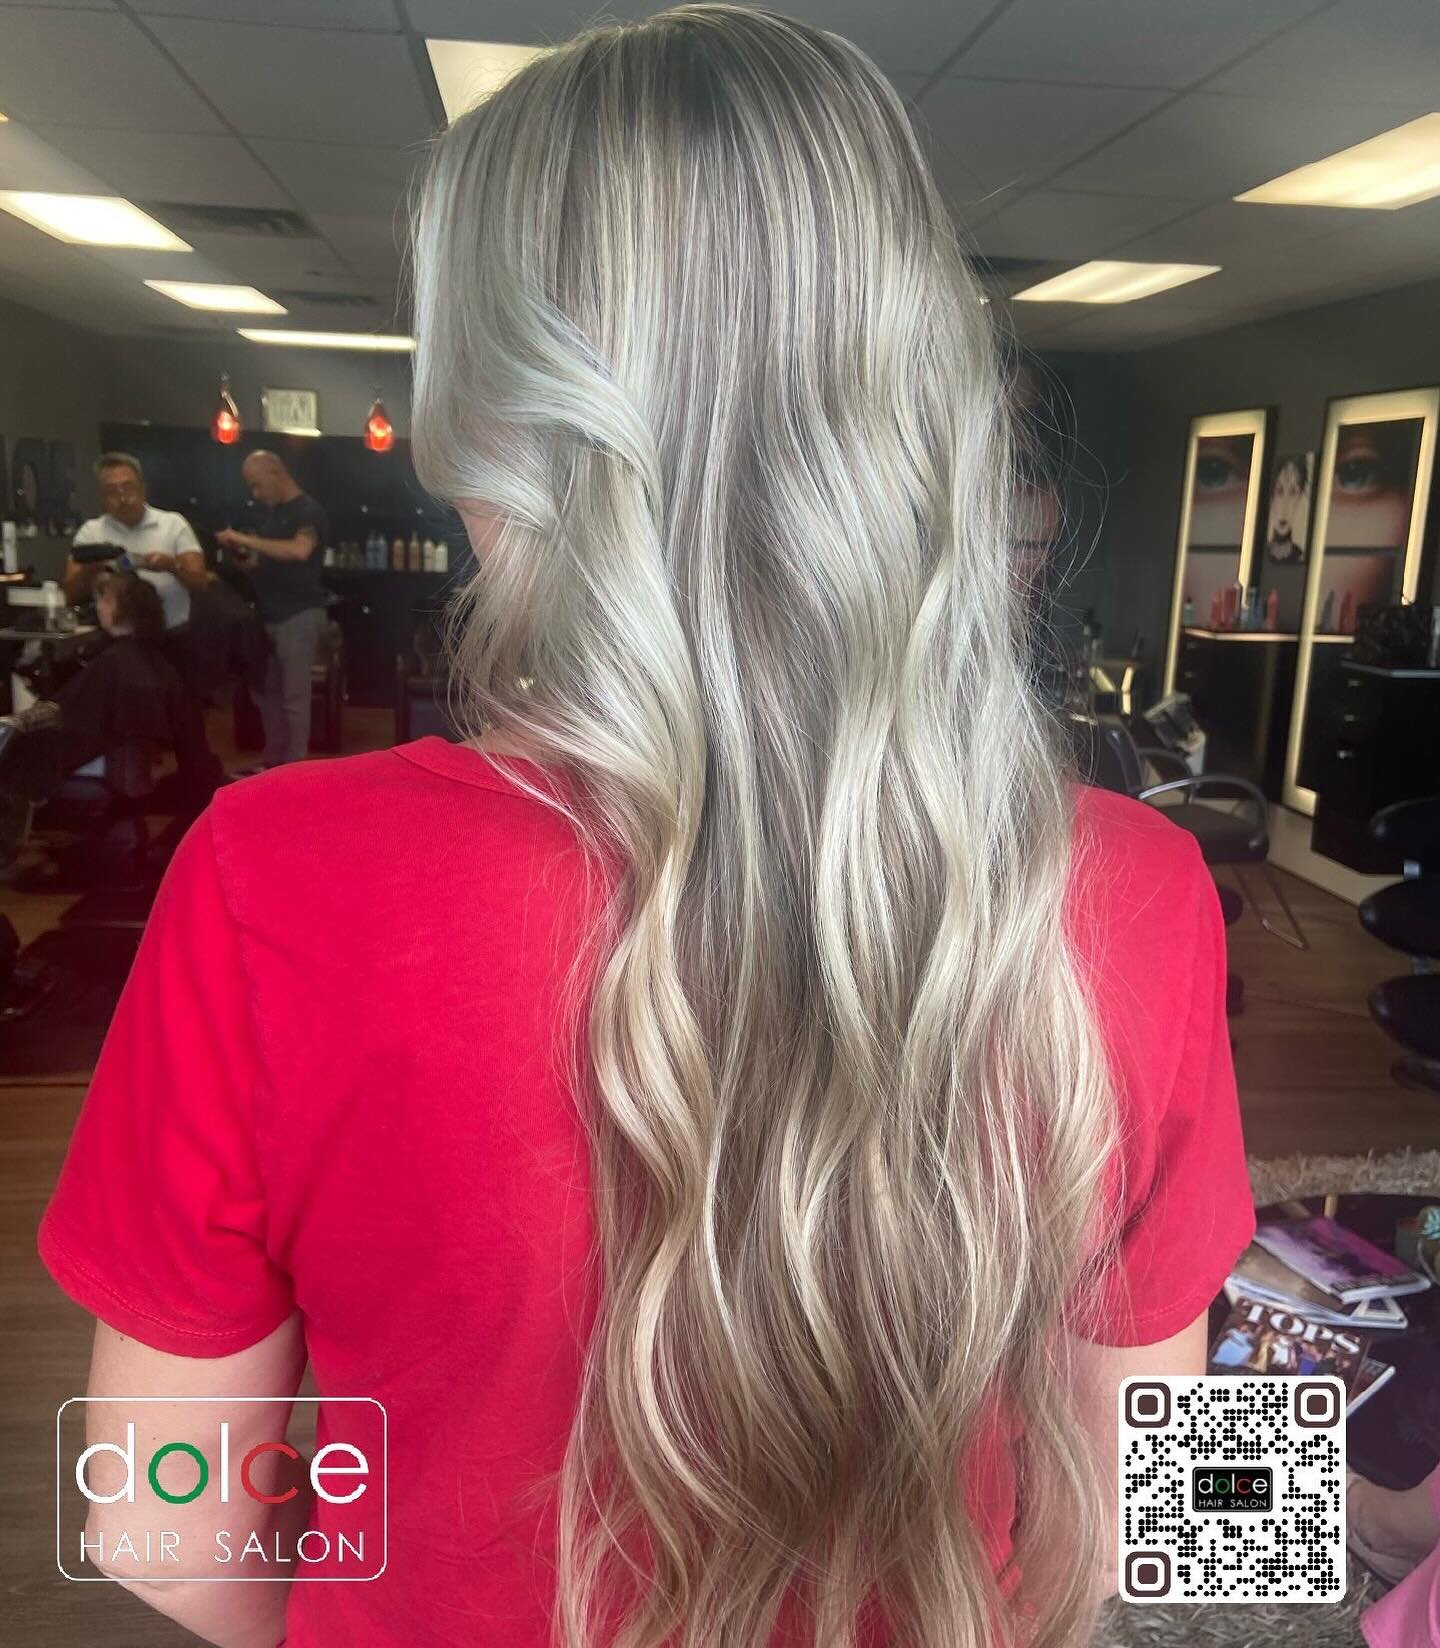 Top Notch Spring Blonde 👌🔥 @dolce.hair.salon  Book your hair color appointment today! #lexingtonhair #lexingtonhairsalons #lexingtonky #springblonde #lexingtonhaircolor